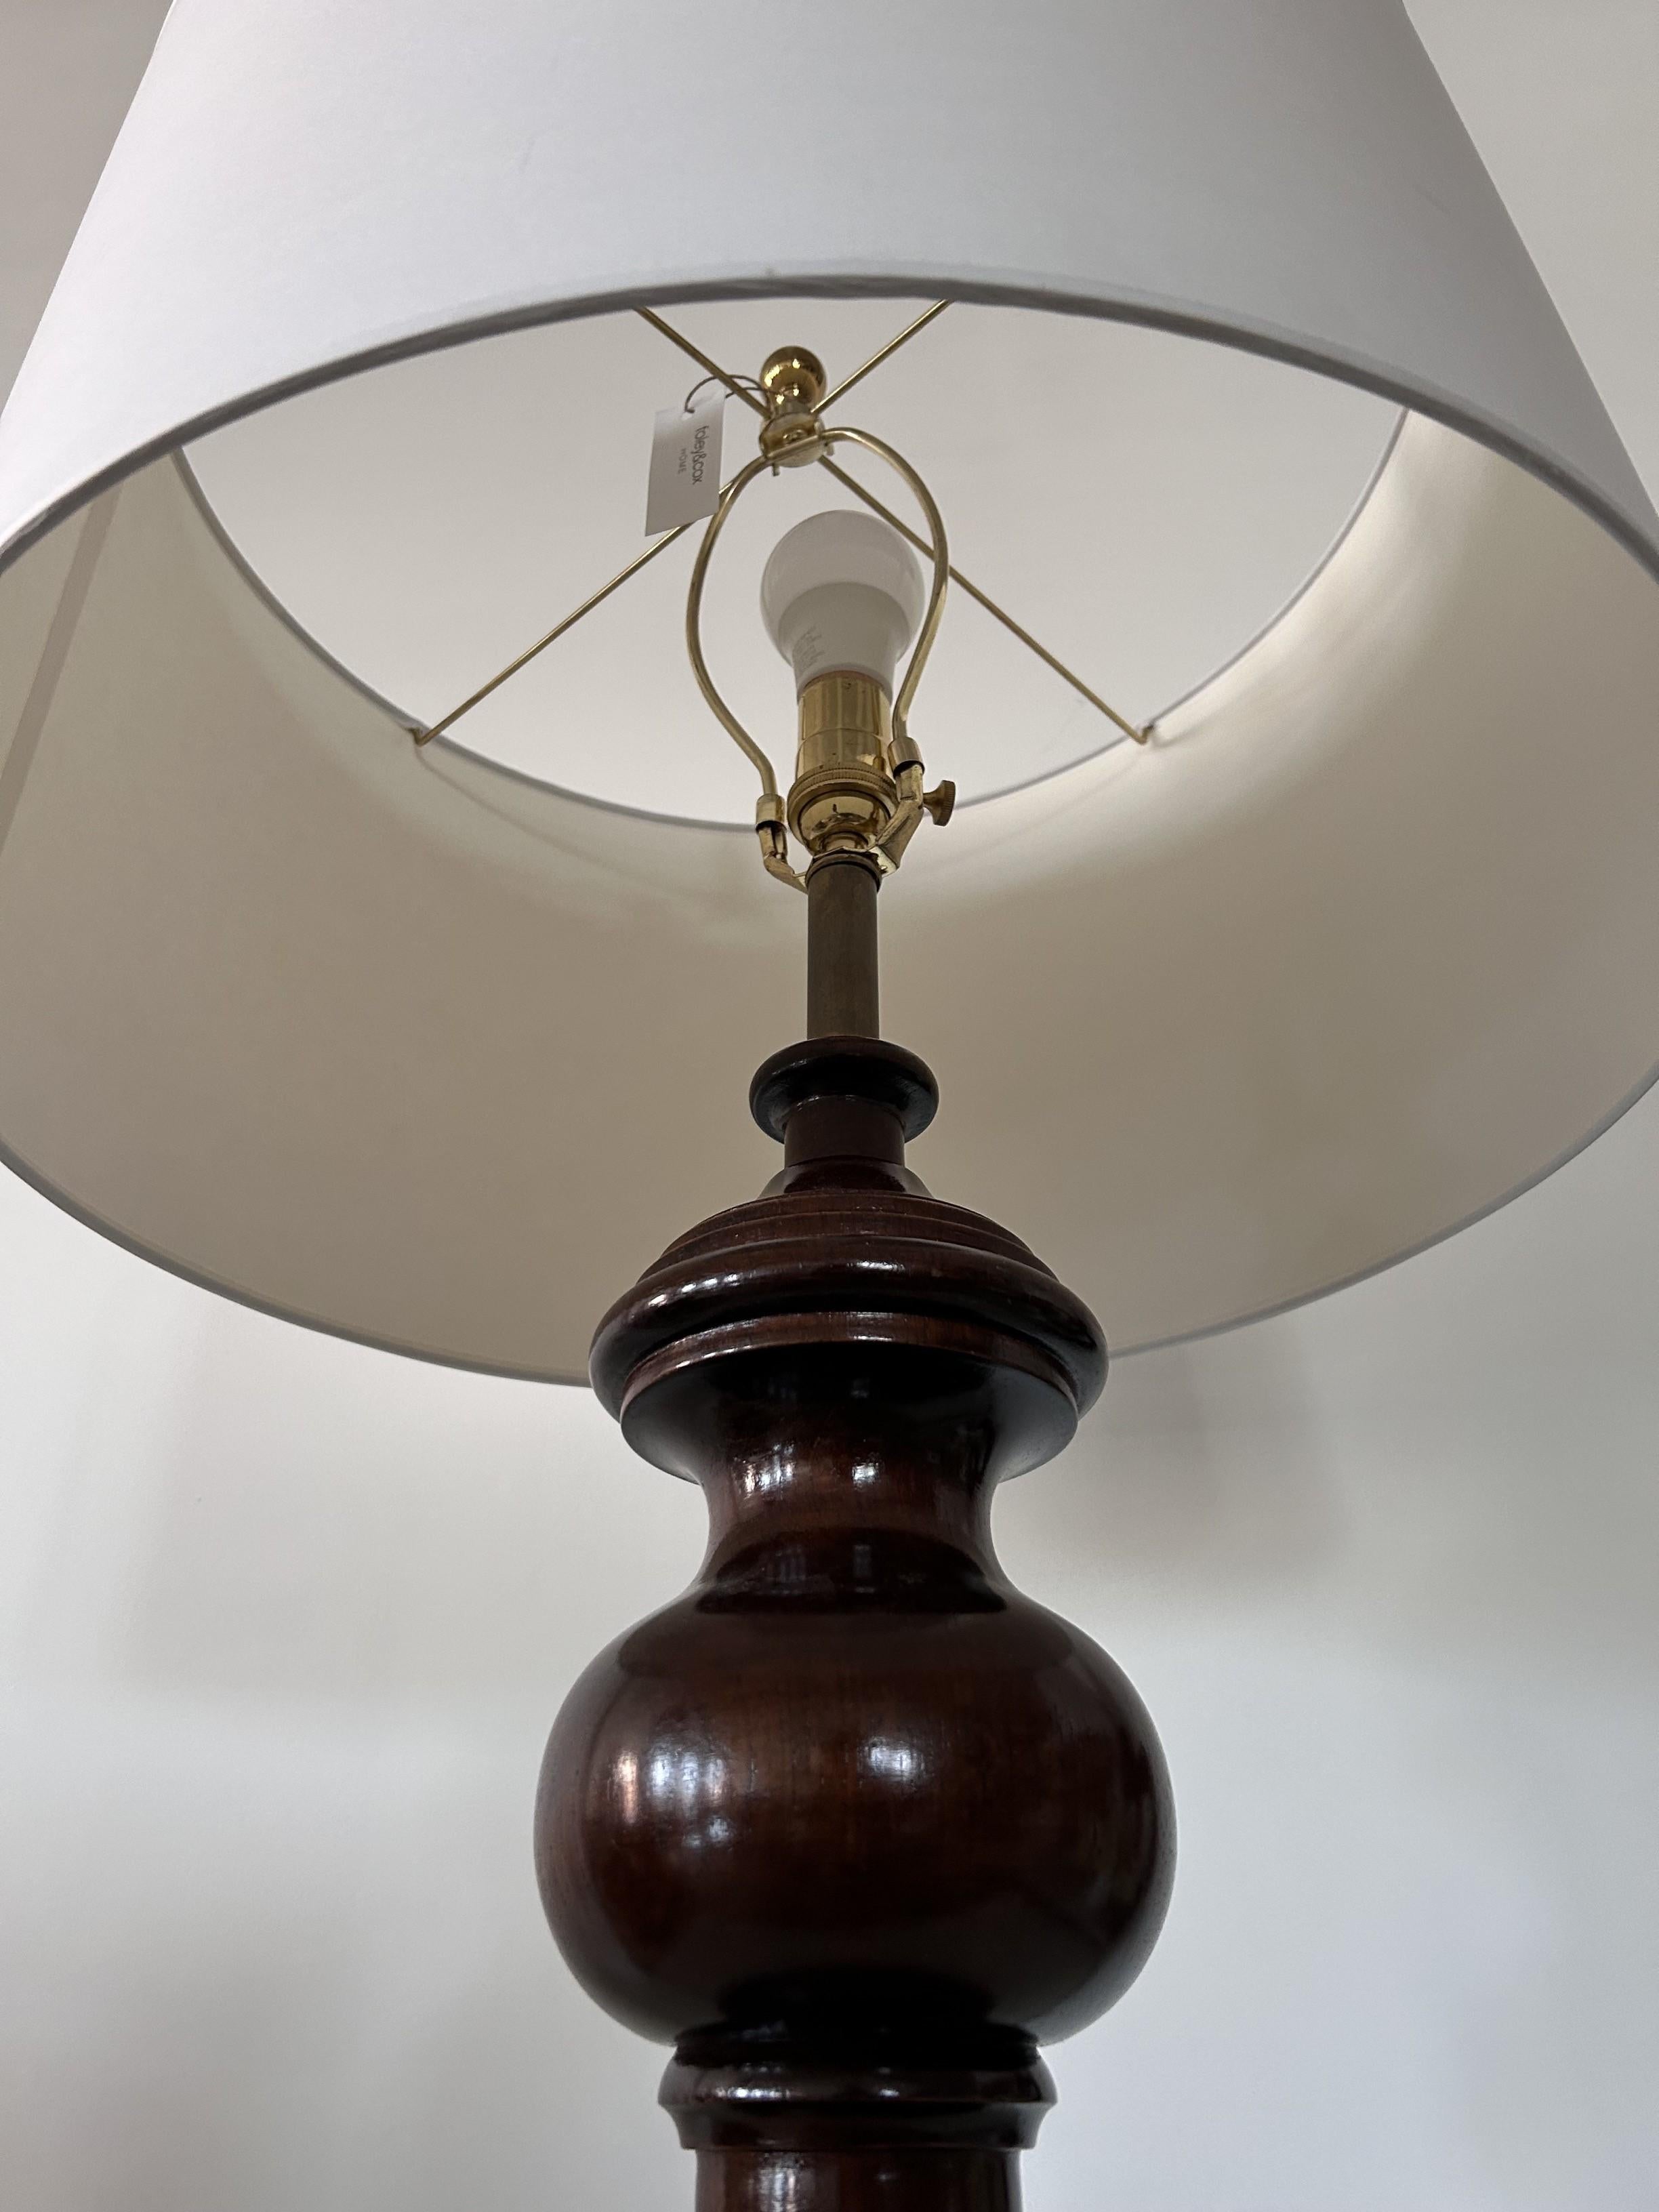 Colonial Revival Teak Lamp with Turned-Base by Robert Lighton For Sale